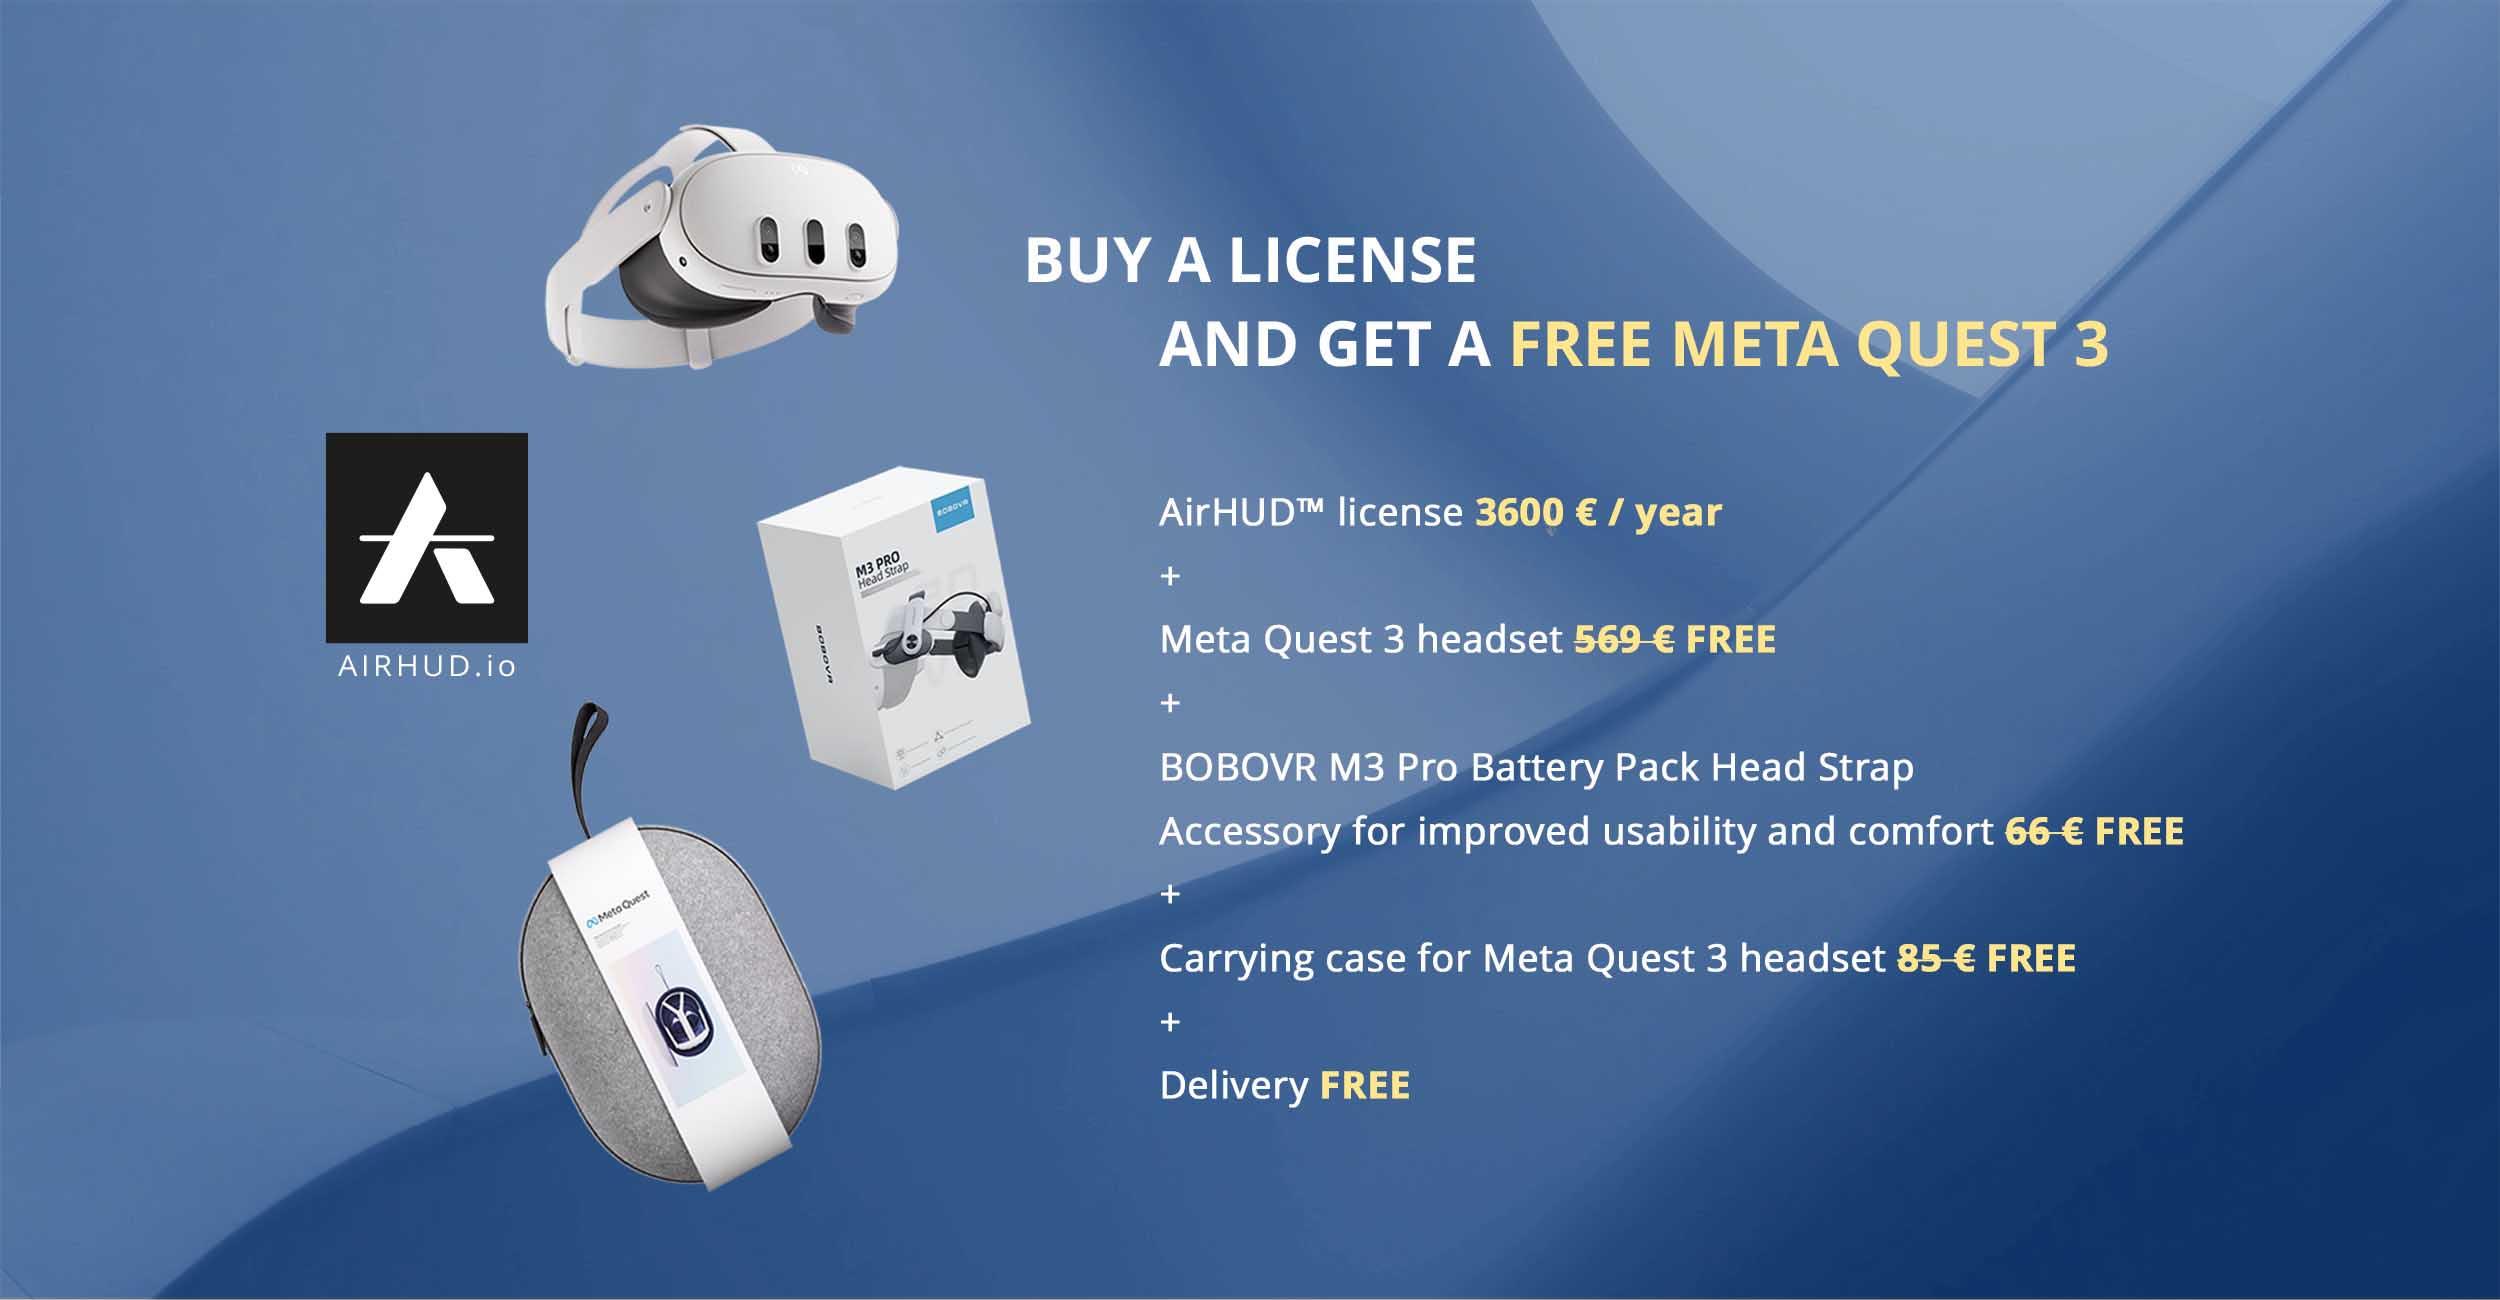 Buy a license get a free Meta Quest 3